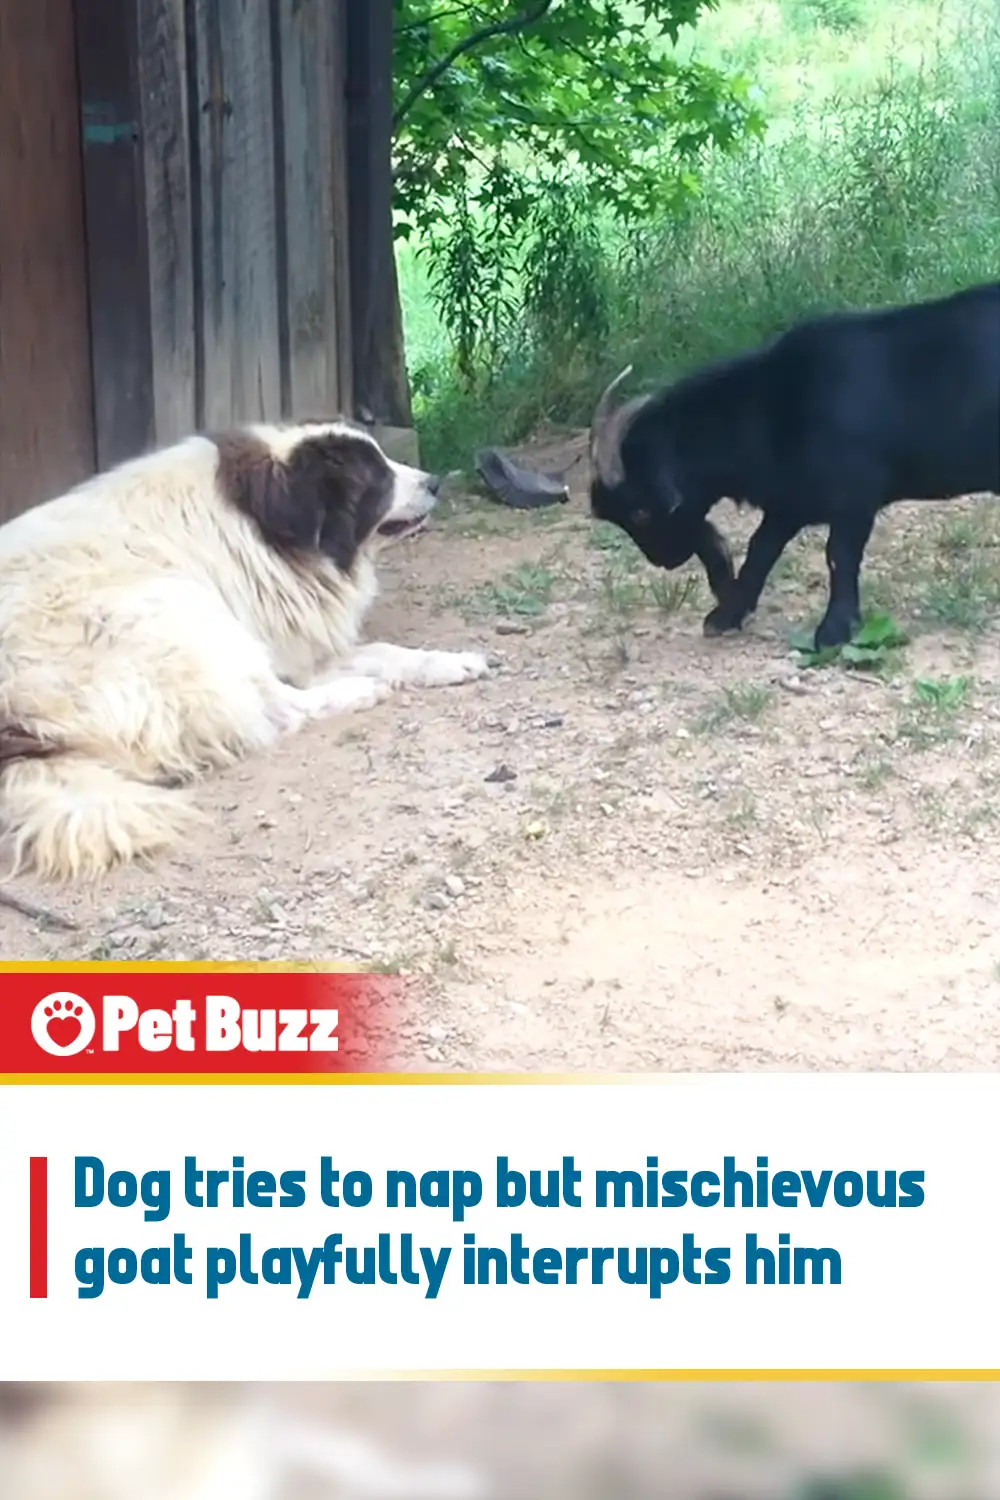 Dog tries to nap but mischievous goat playfully interrupts him